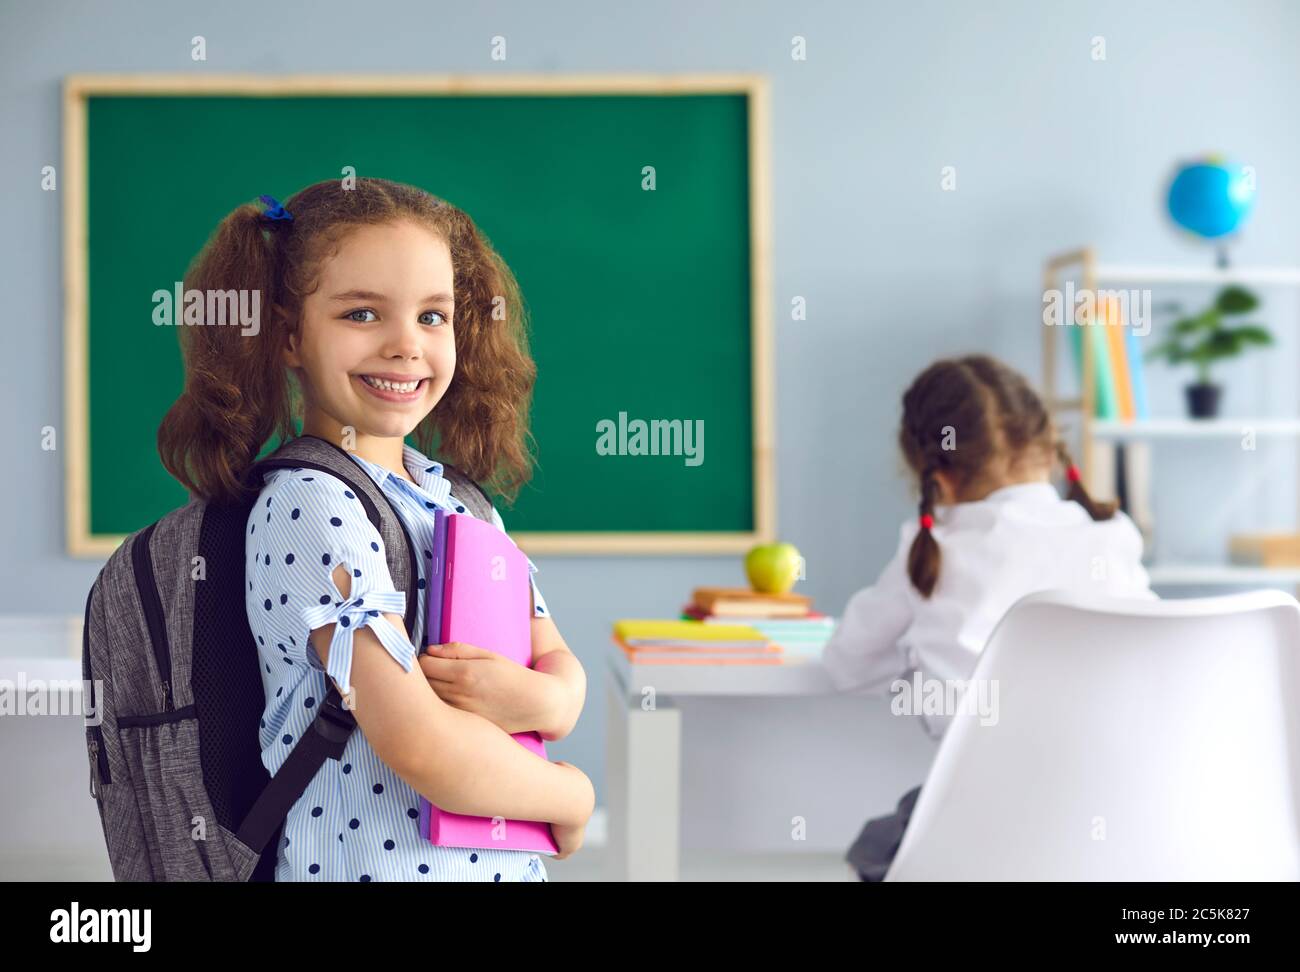 Back to school. Smiling schoolgirl with a book in her hand looks at the camera while standing in class. Stock Photo